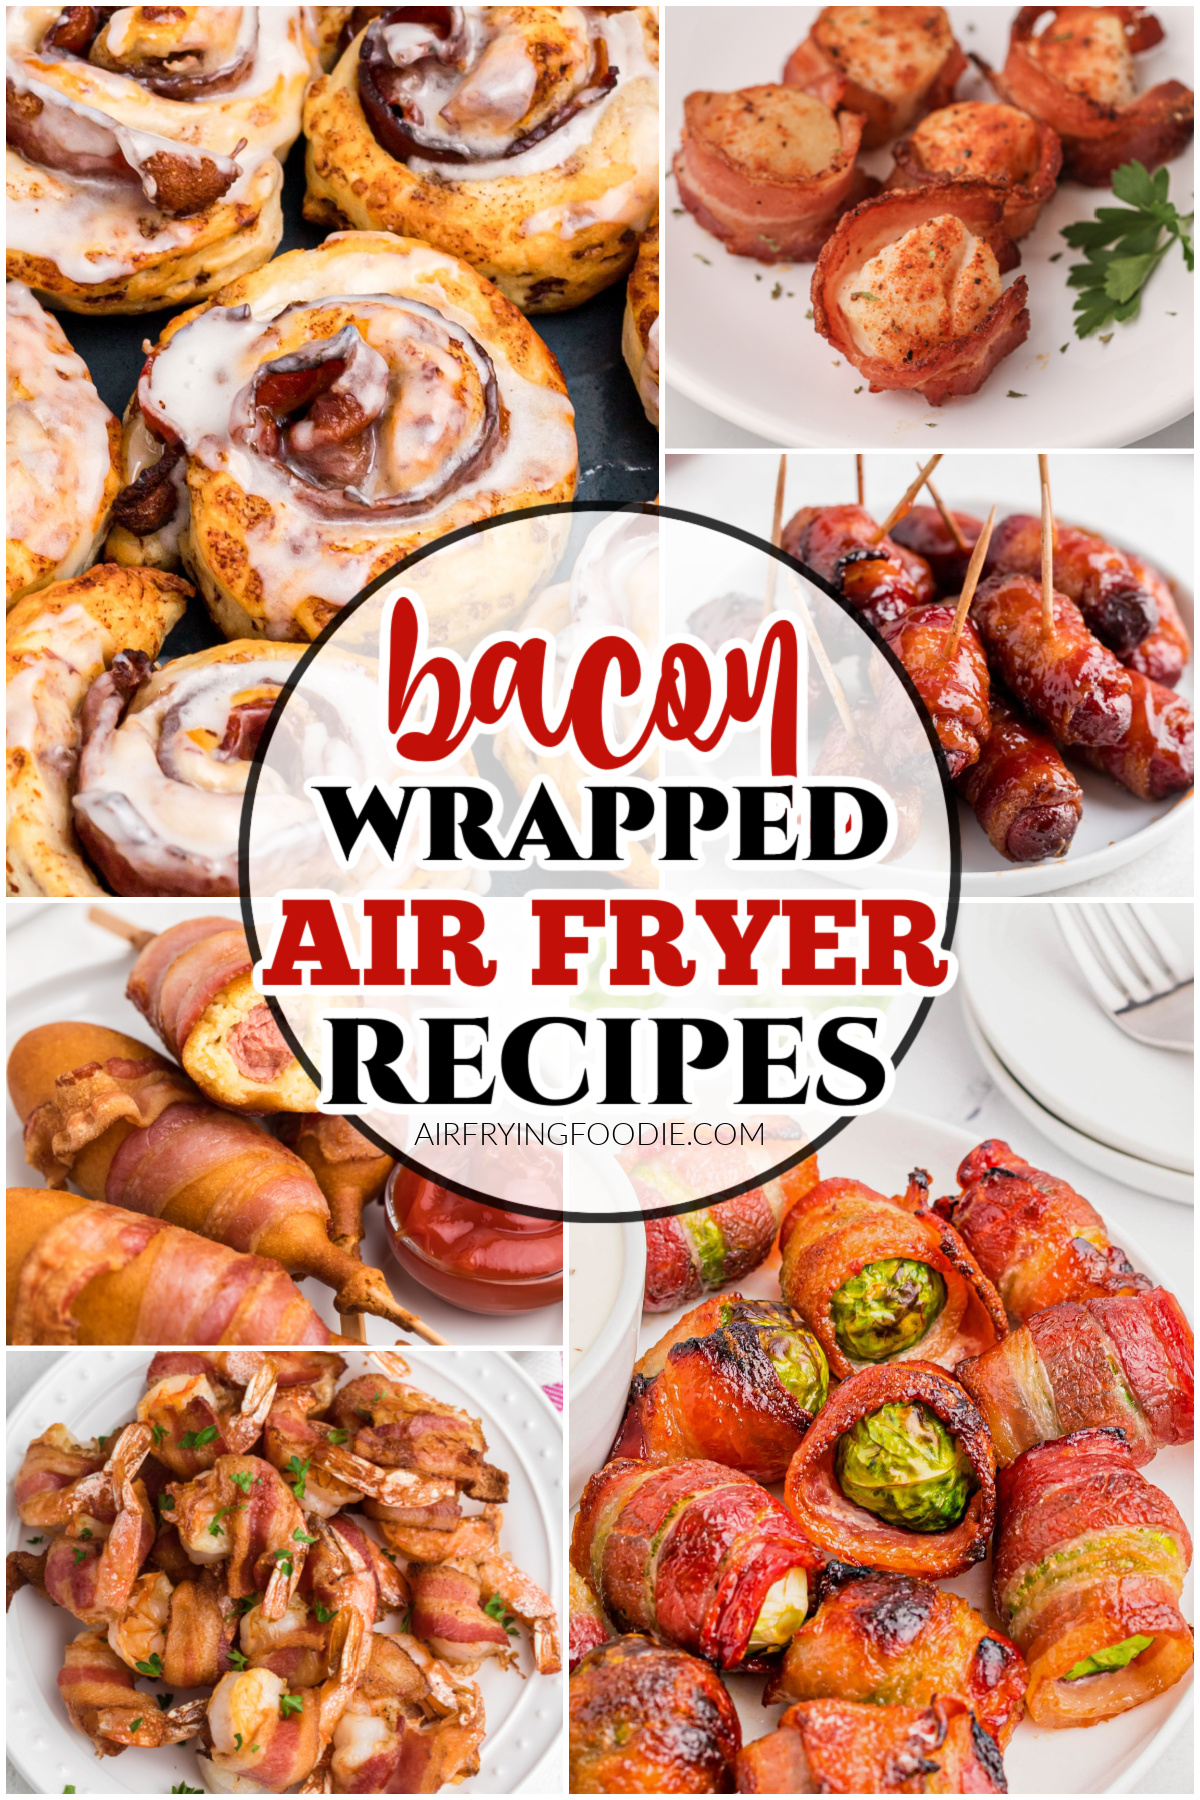 Collage of photos of bacon wrapped recipes made in the air fryer.